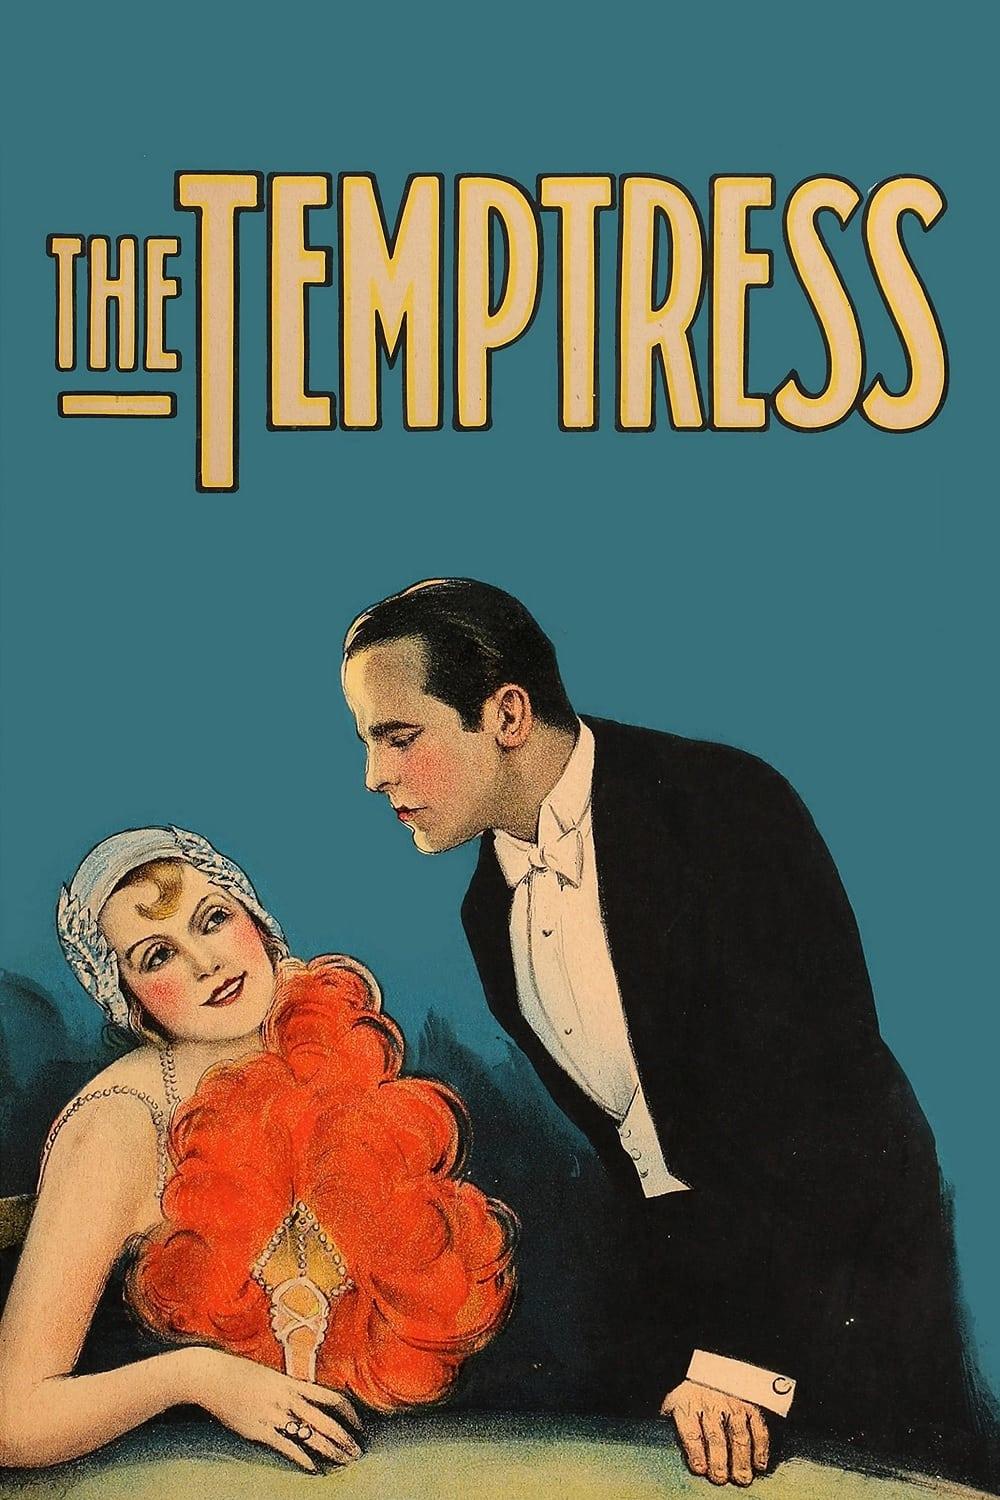 The Temptress poster